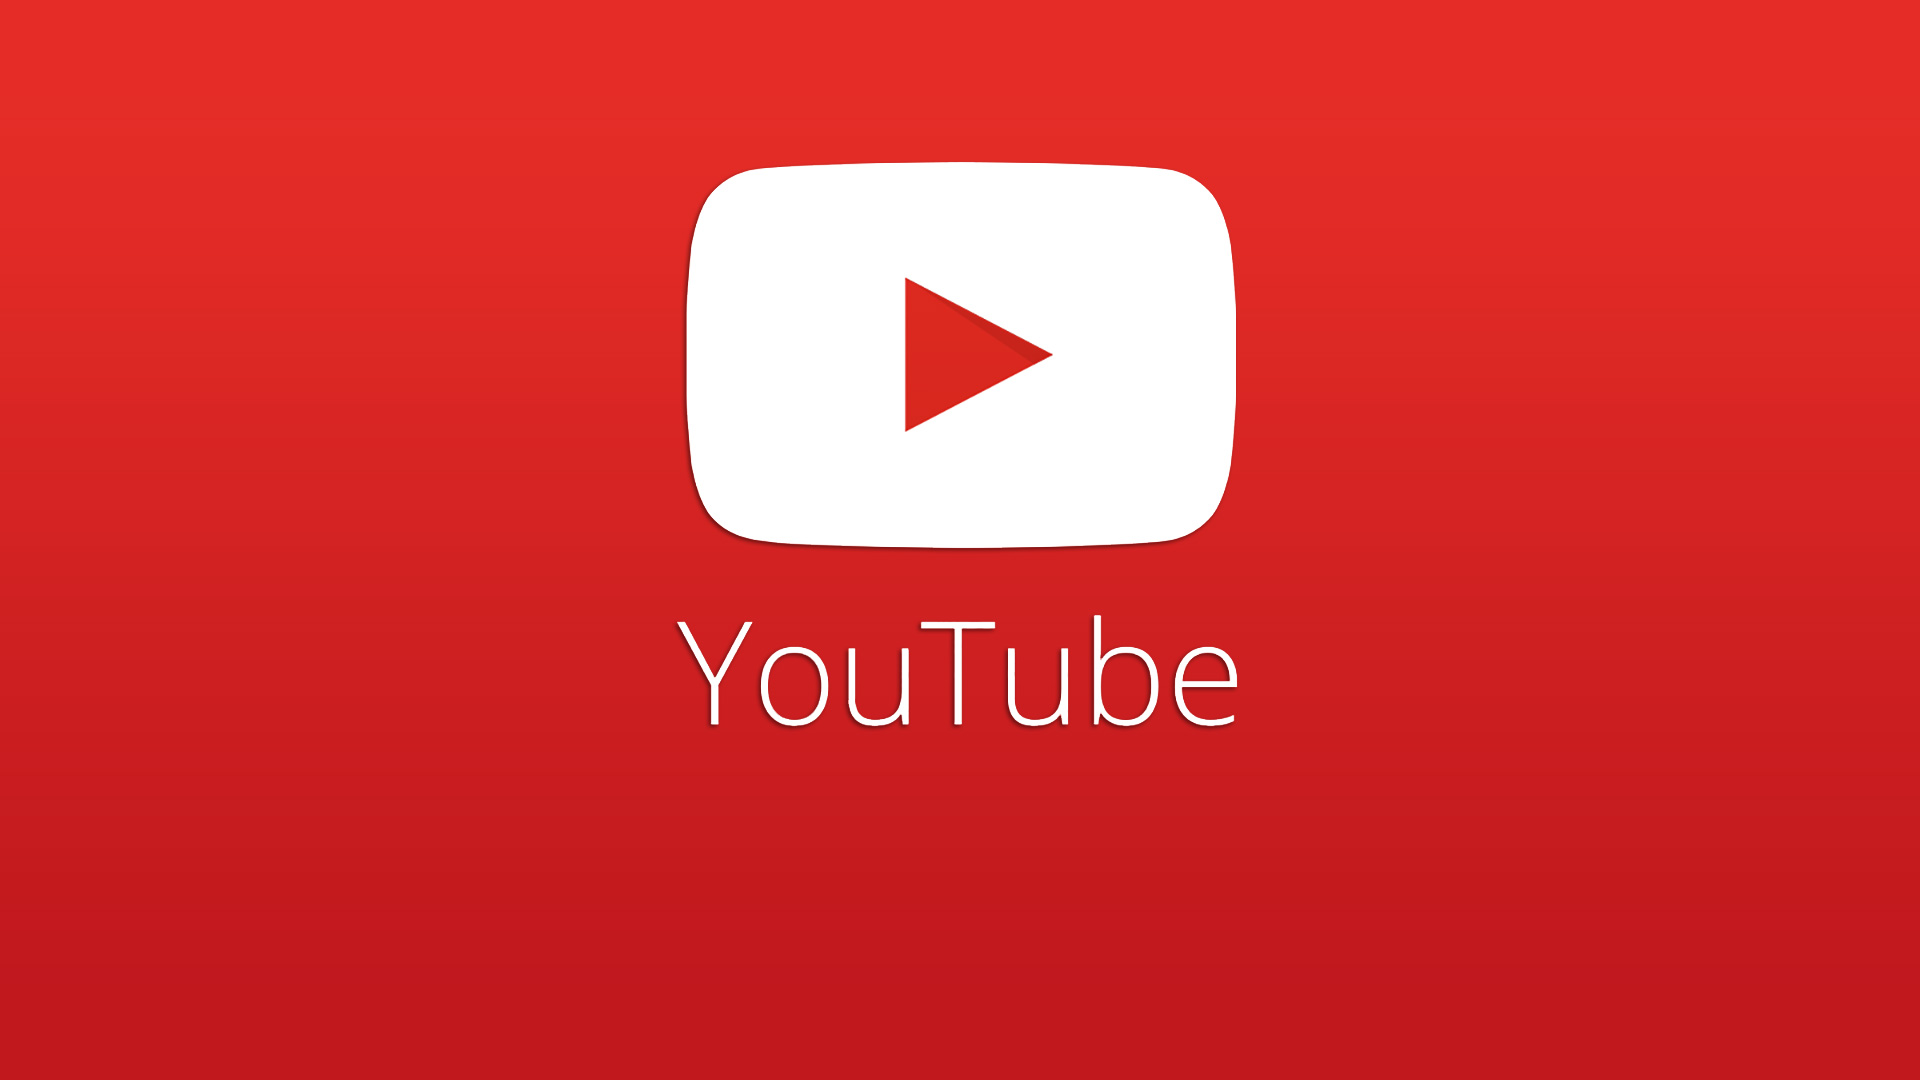 Youtube - Youtube : Youtube Apps On Google Play - When google asks you ...